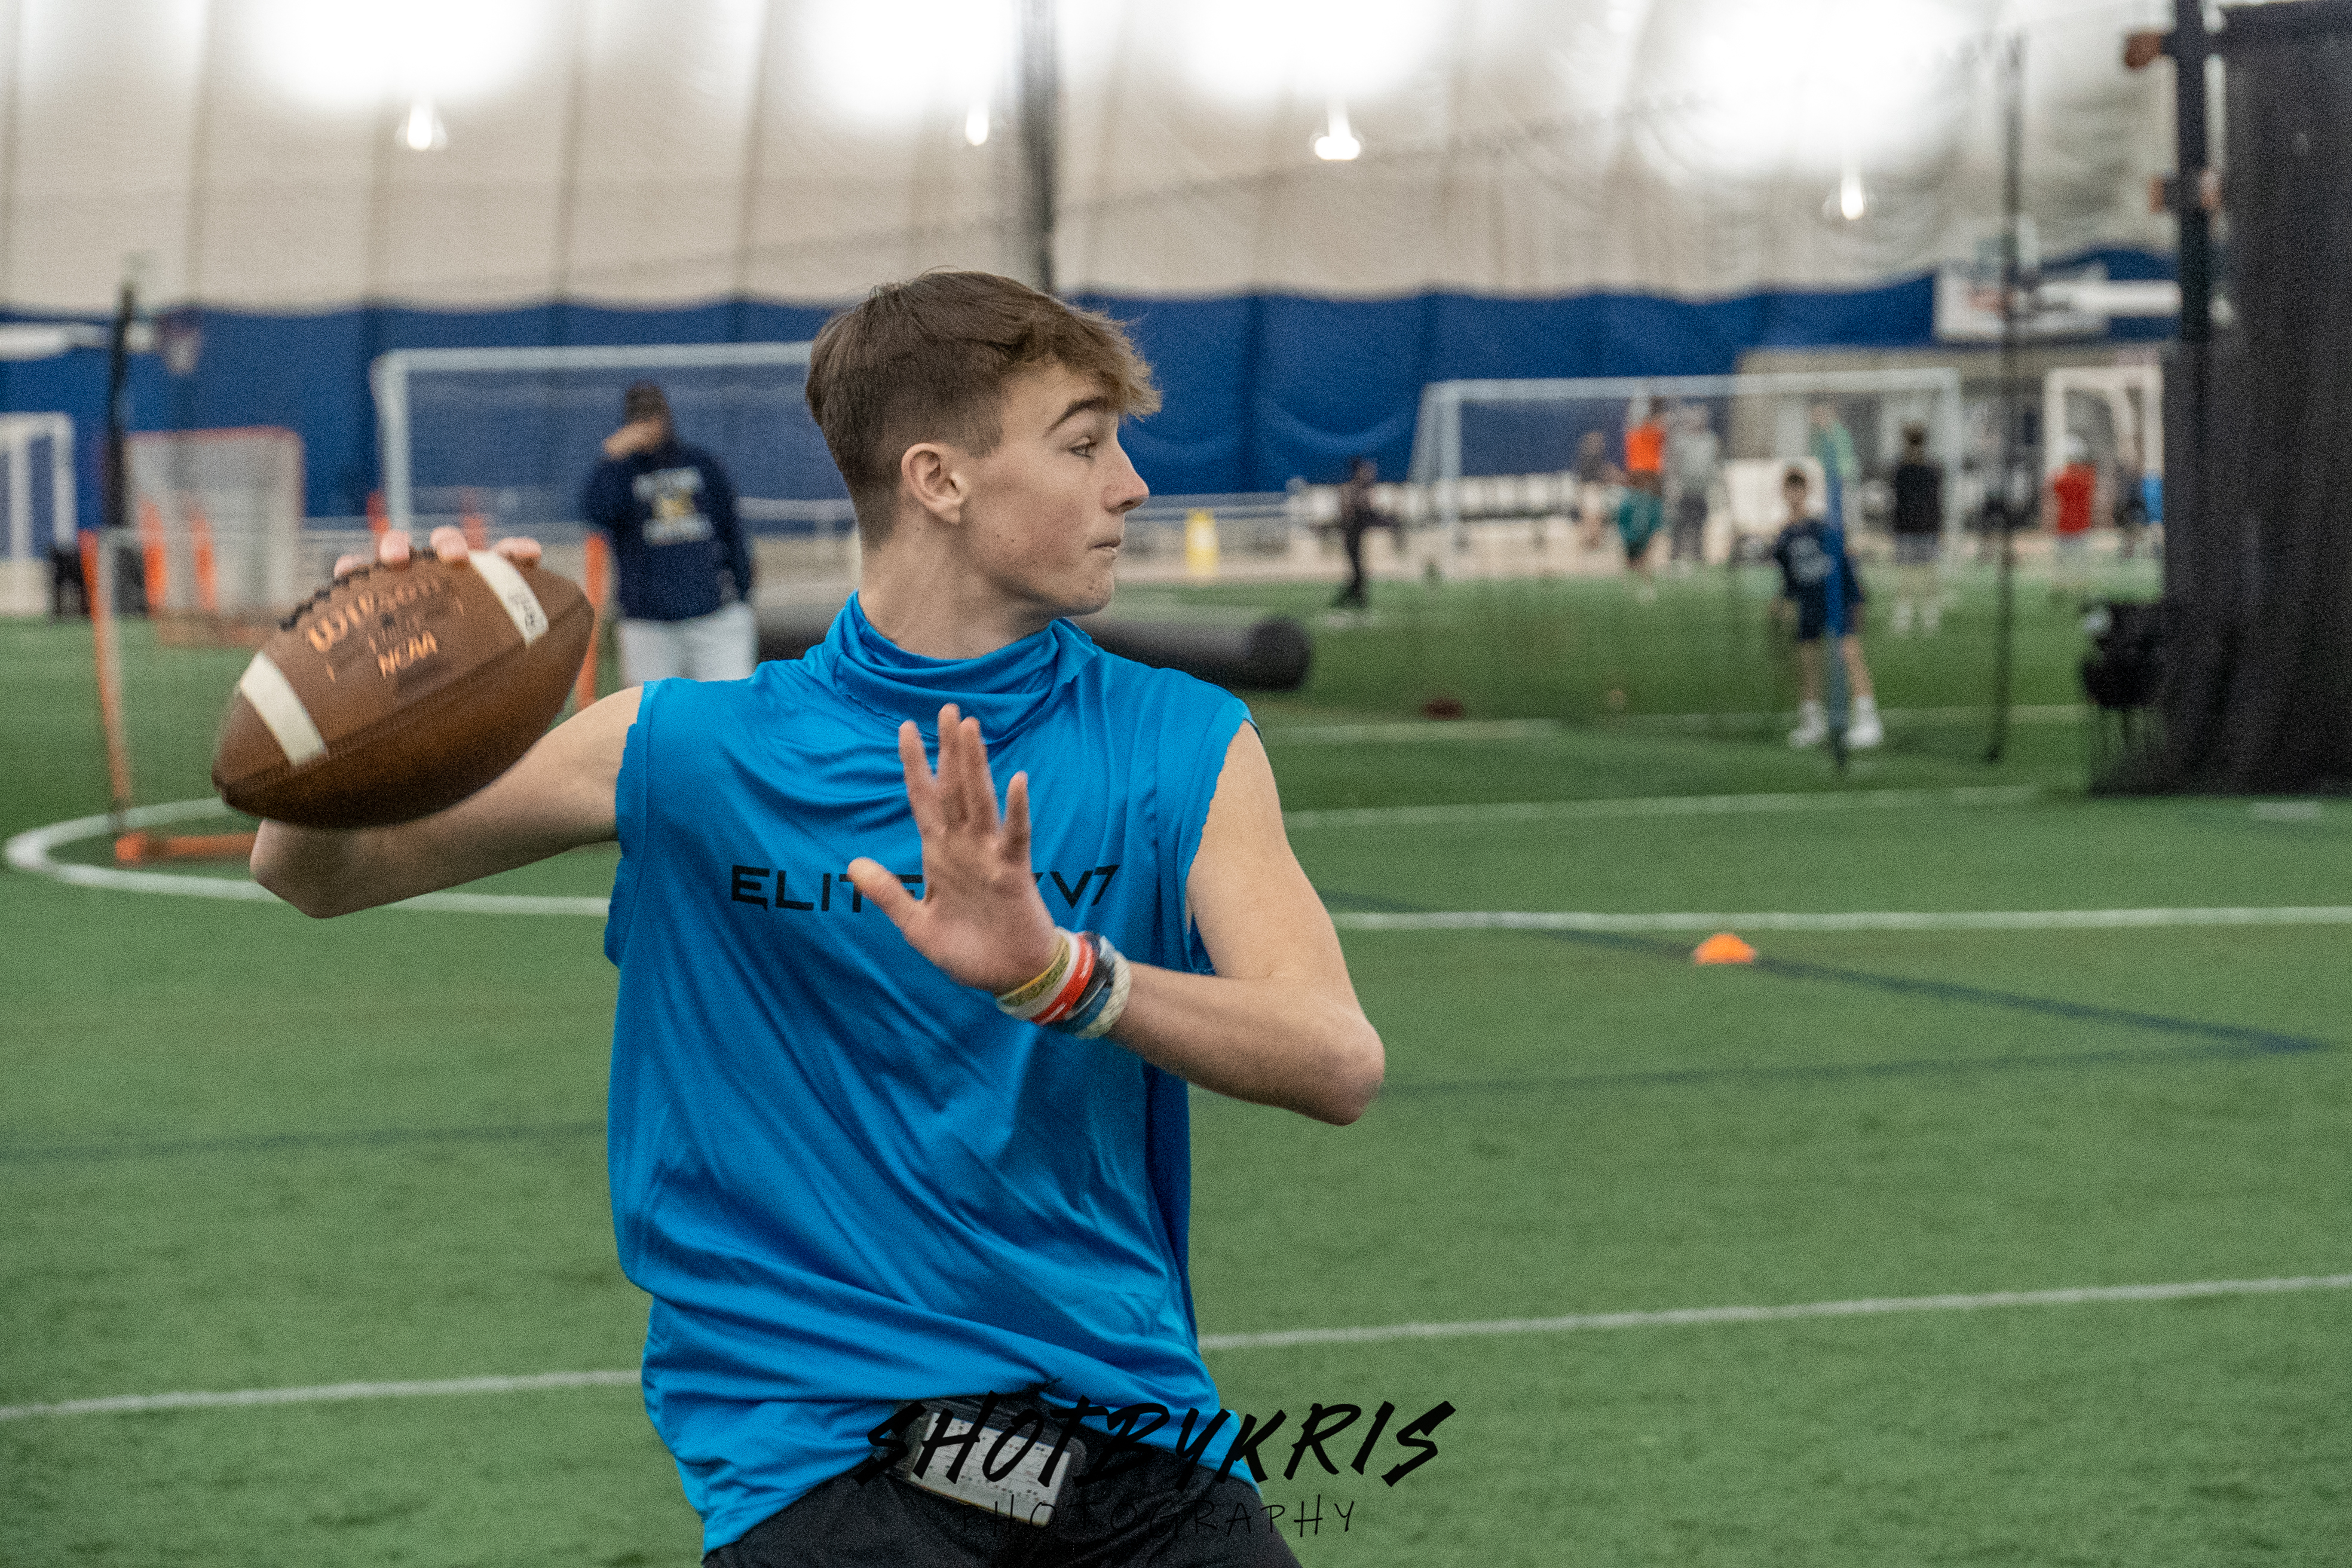 Young Athlete throwing football